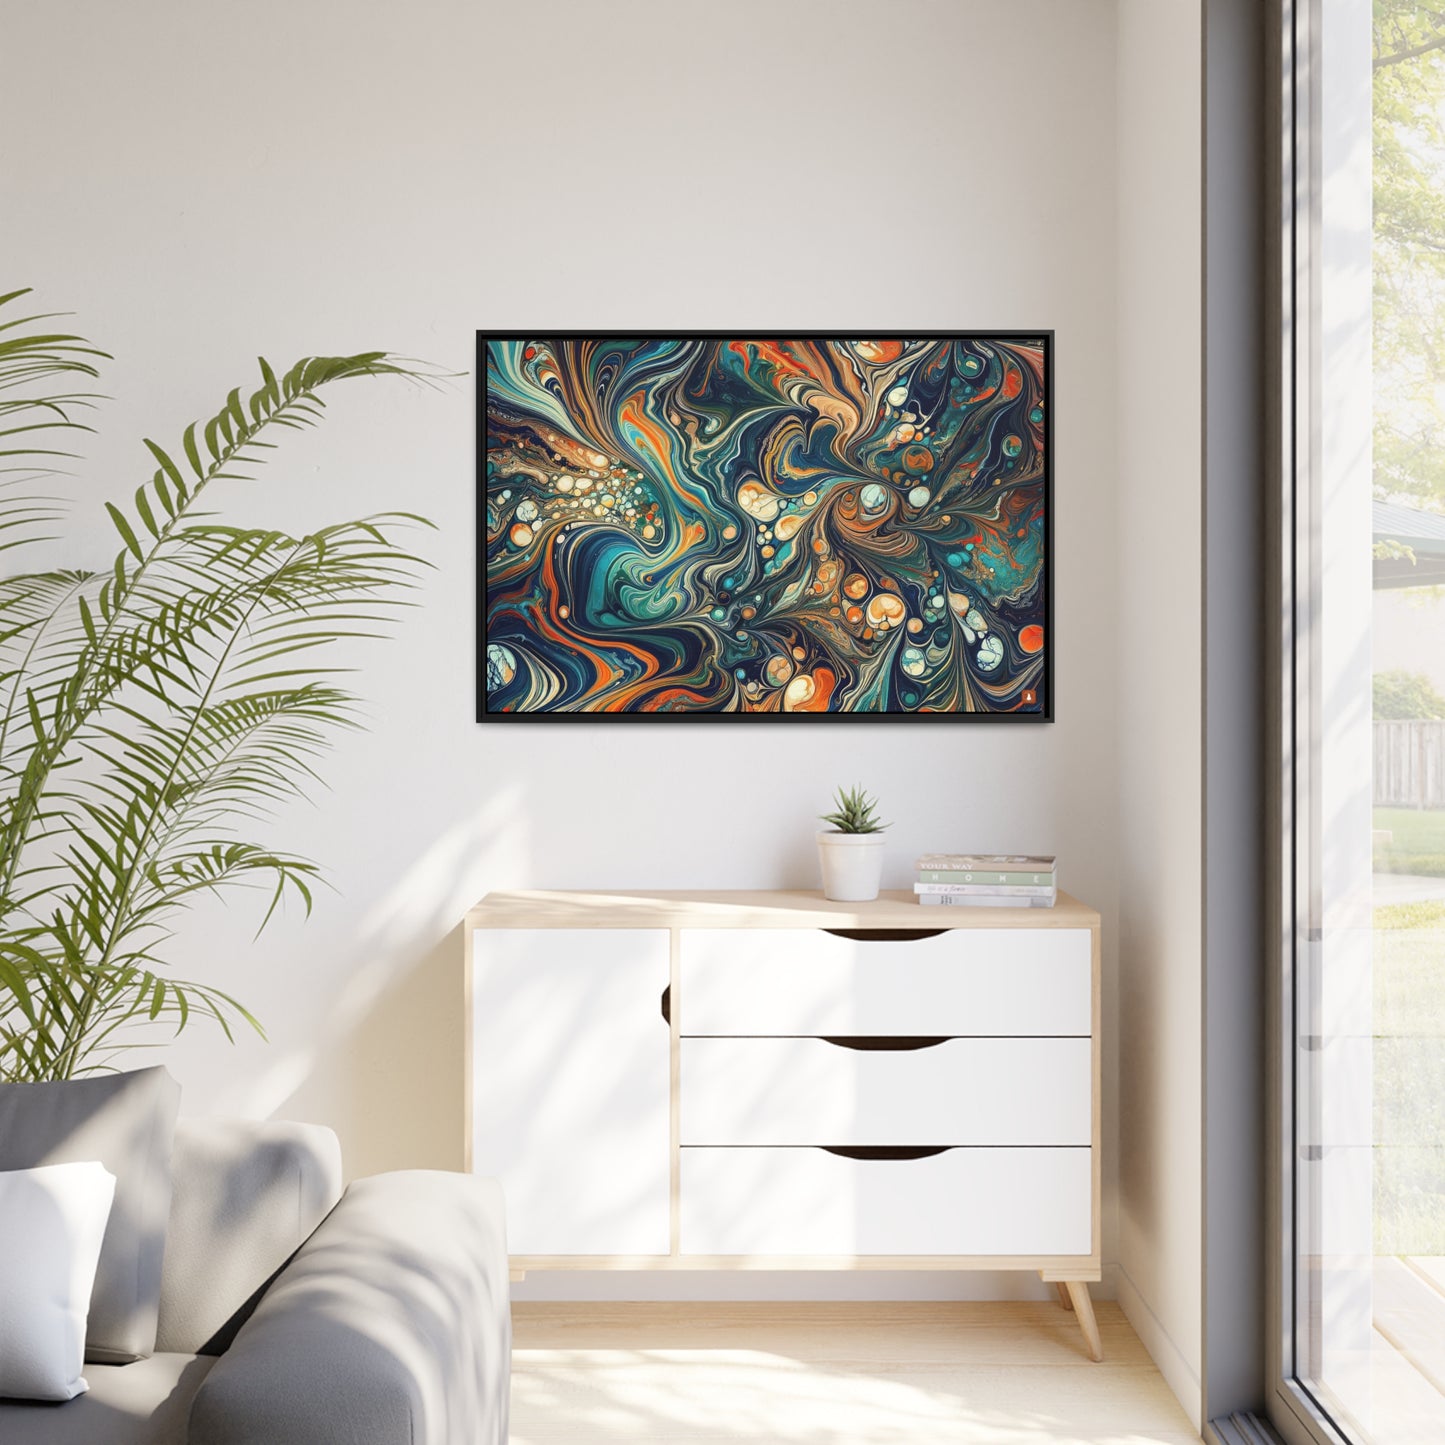 Ocean and Shells | Digital Abstract Work of Art | FRAMED CANVAS WRAP